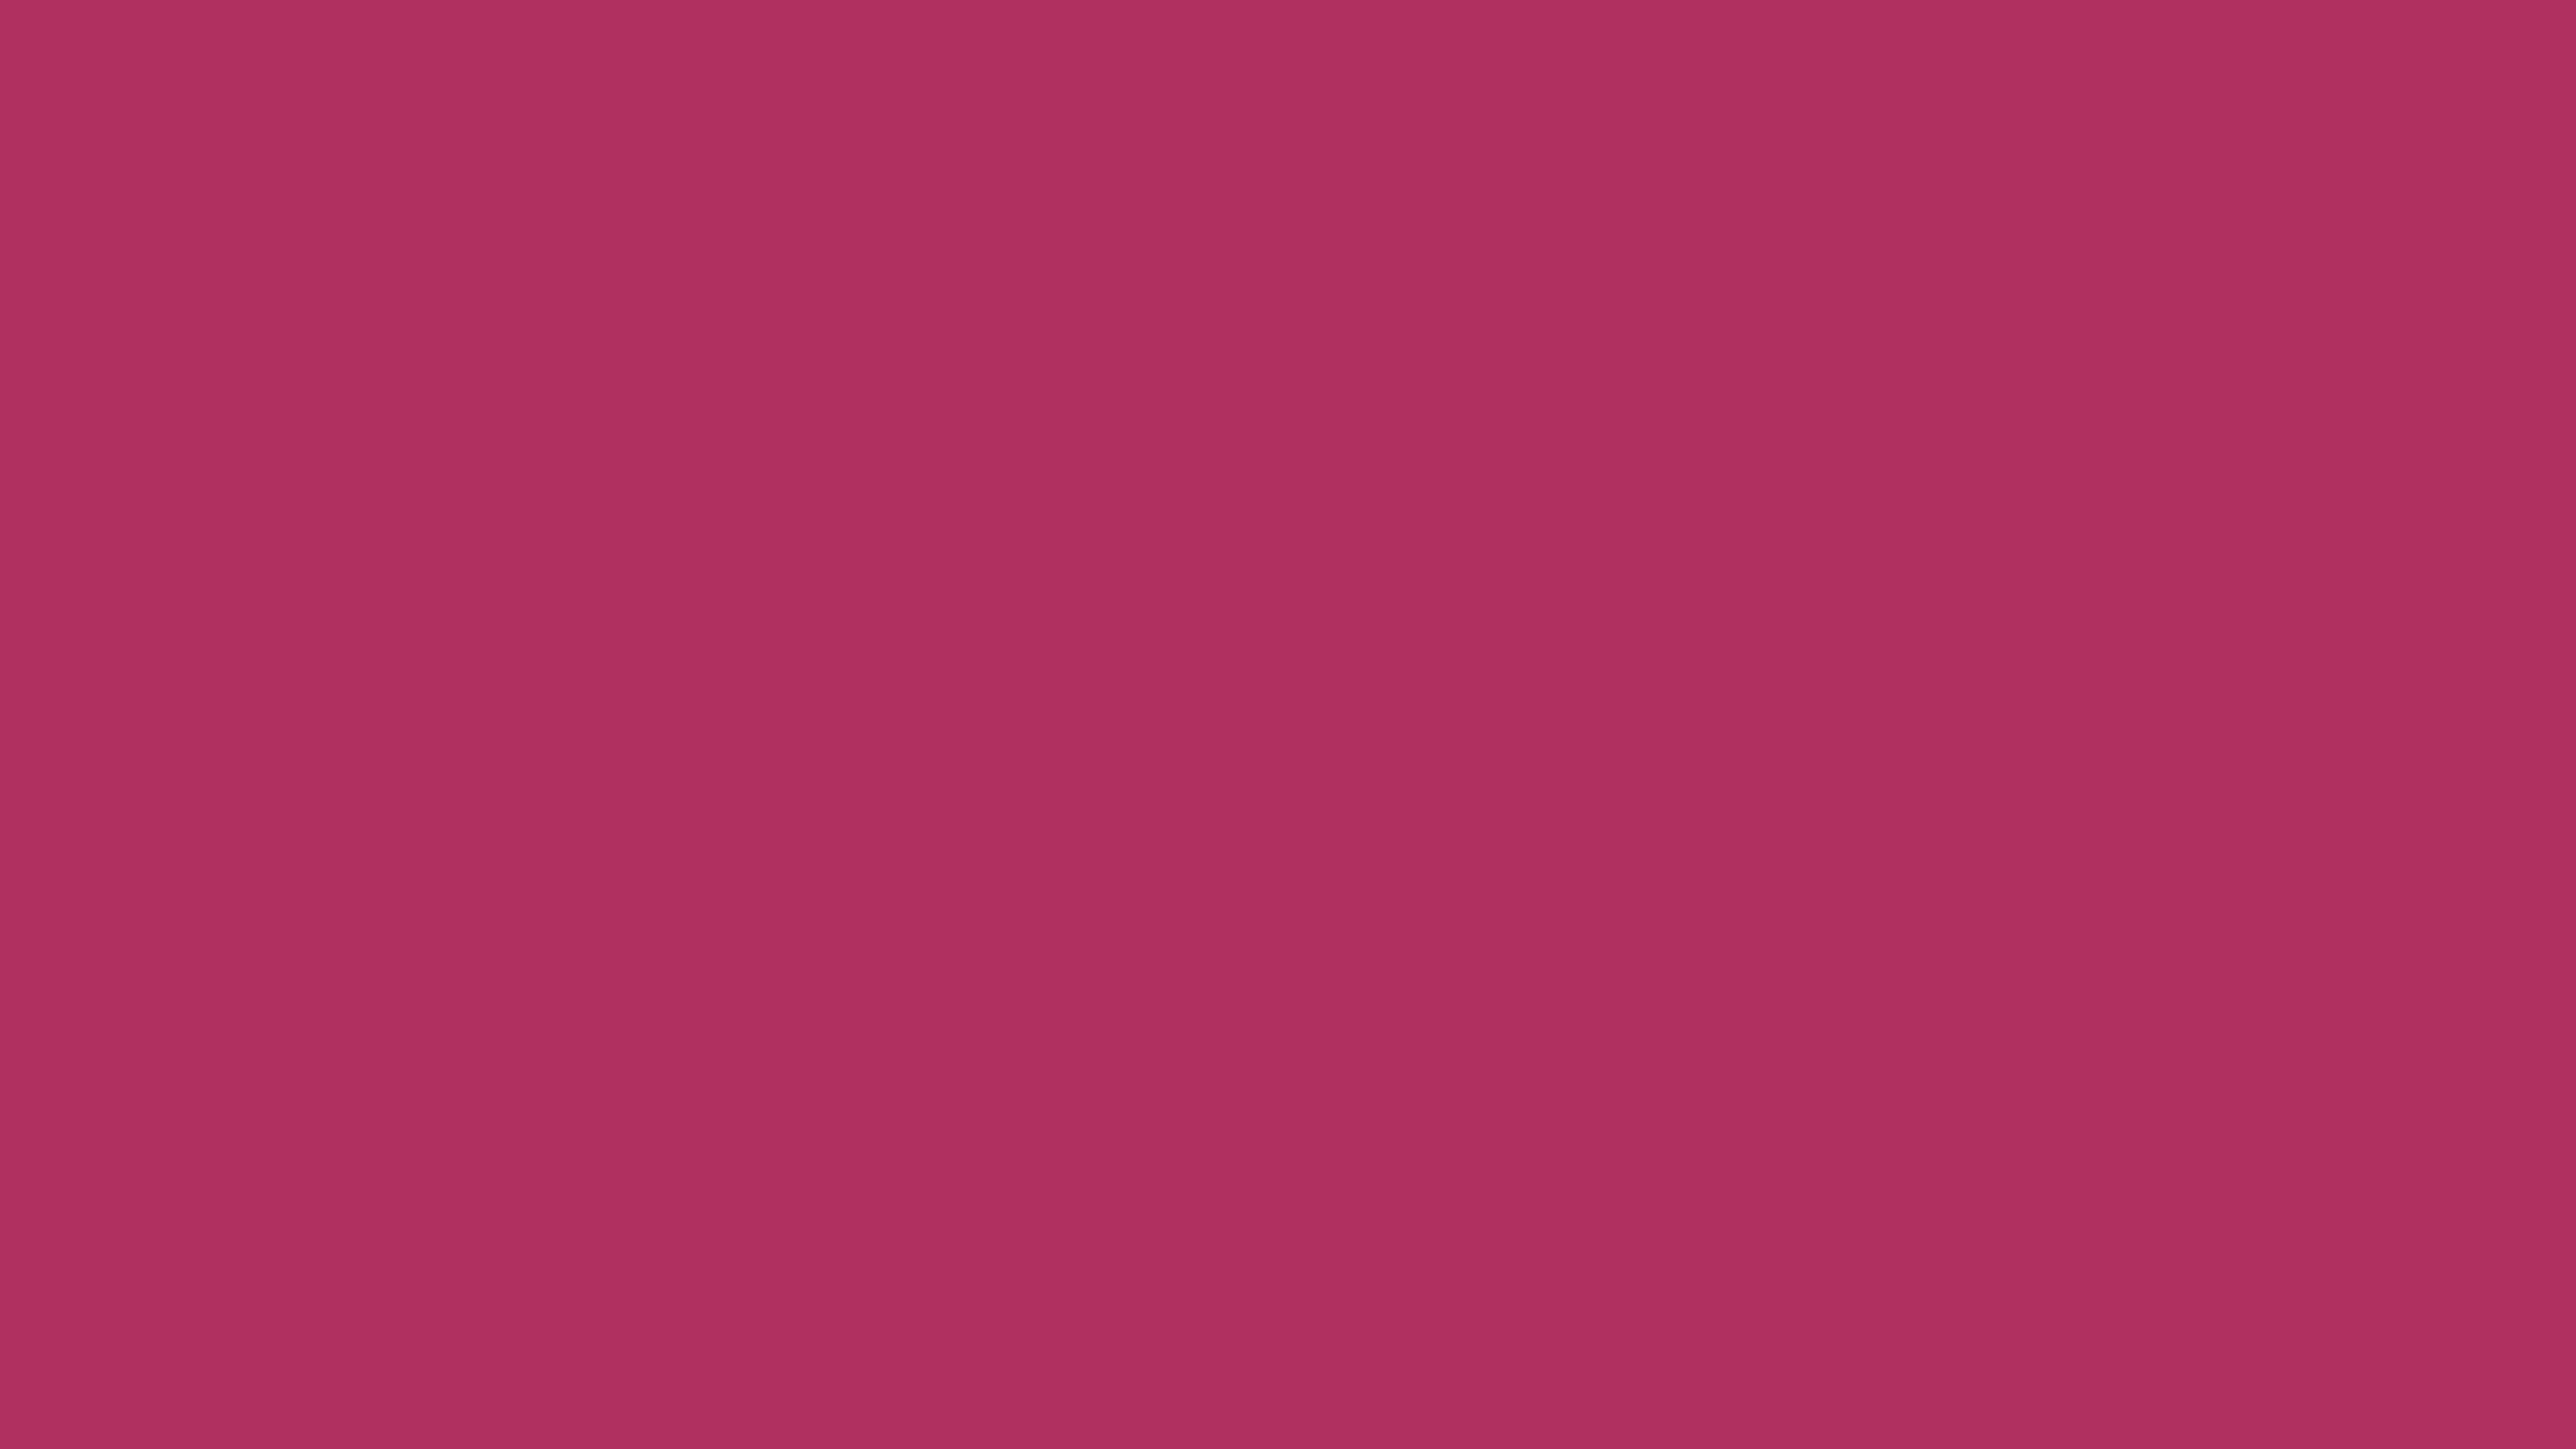 3840x2160 Maroon X11 Gui Solid Color Background